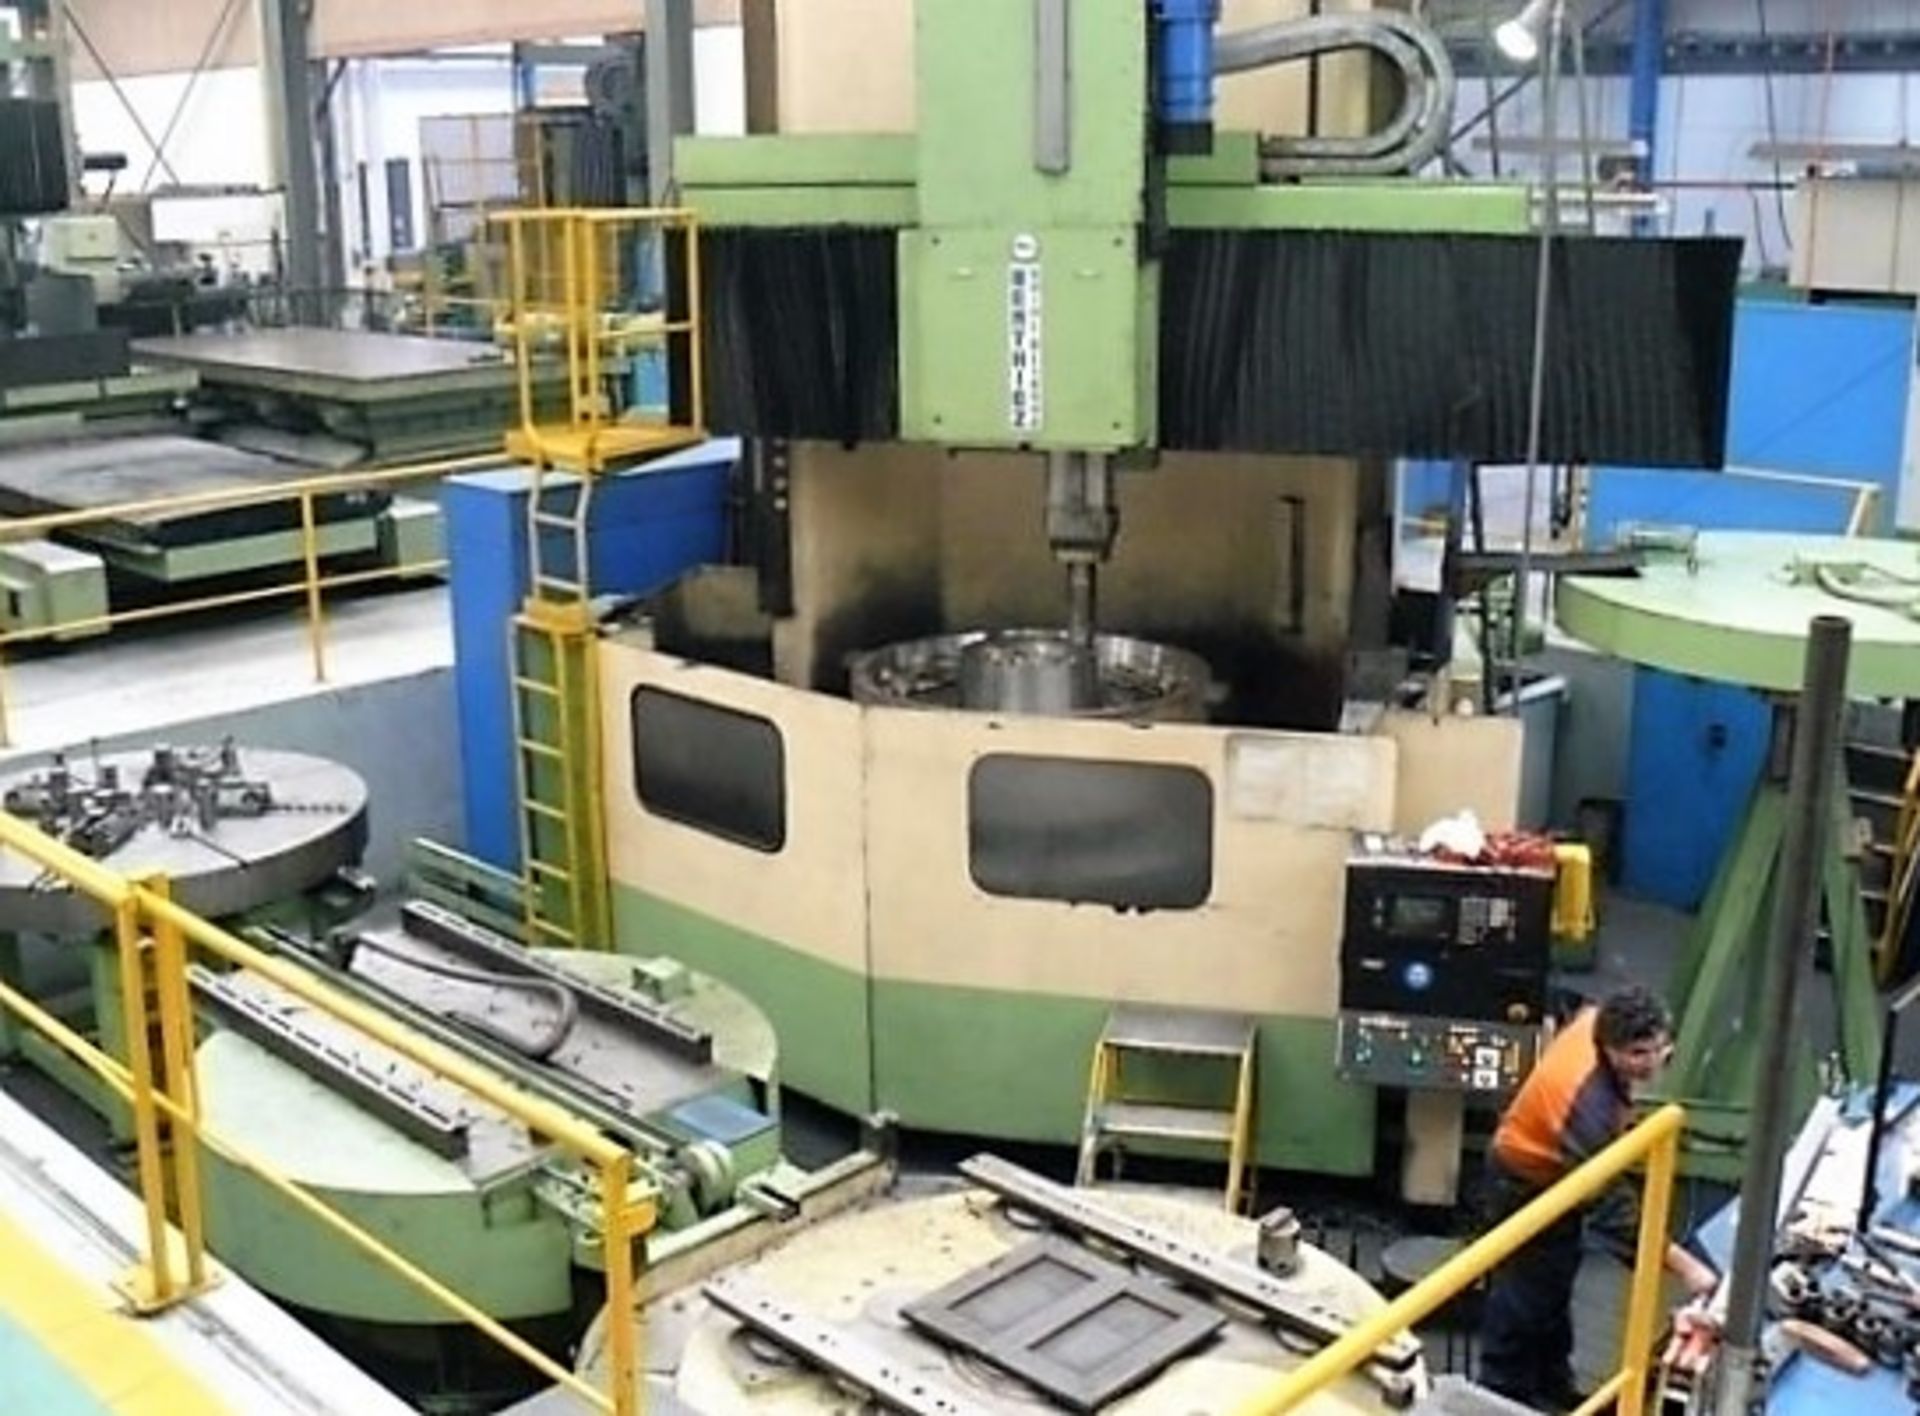 Berthiez LVM-200 CNC Vertical Boring Mill With Live Milling